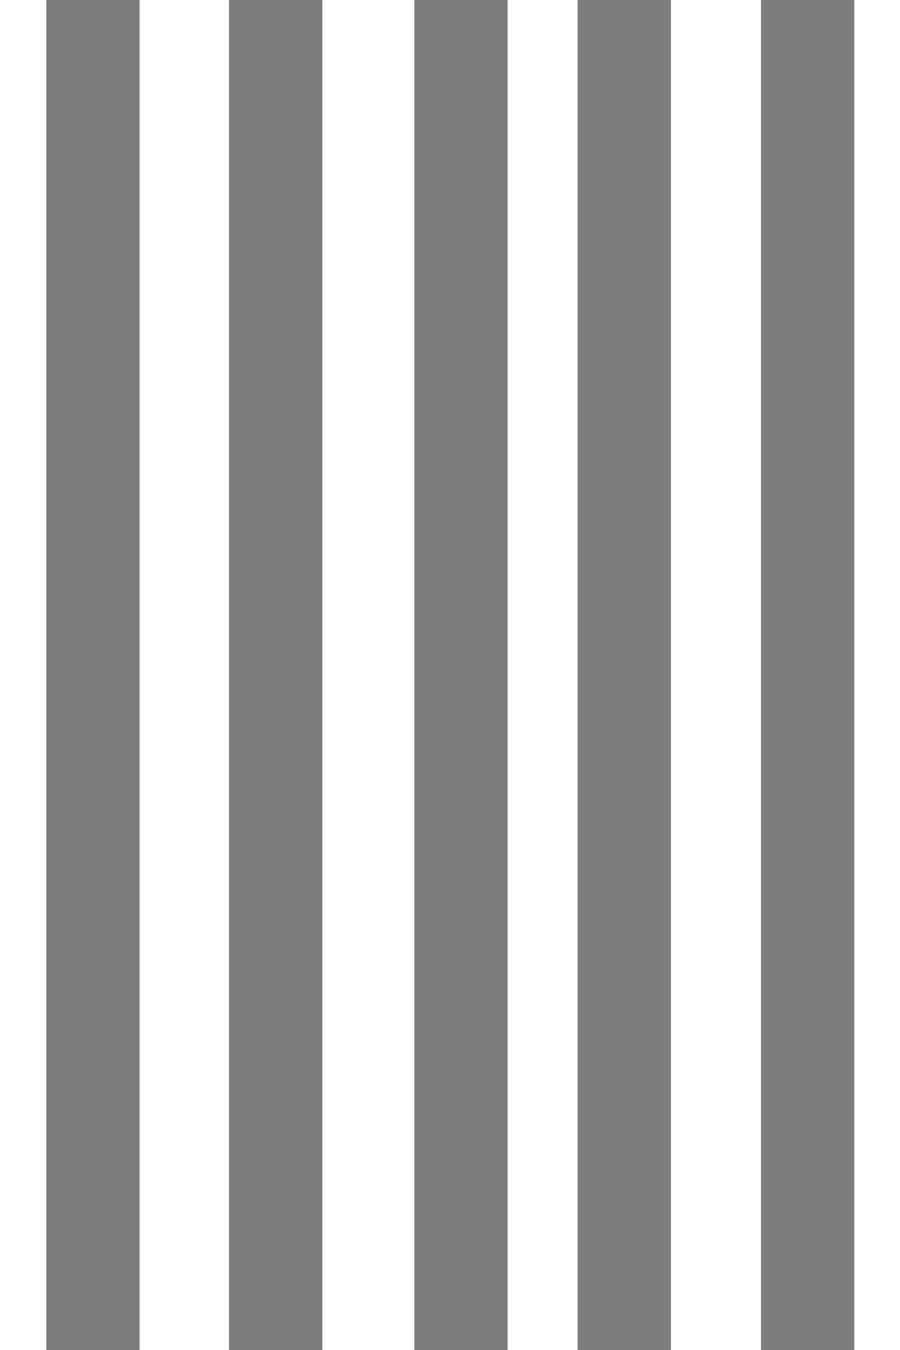 Woolf With Me Fitted Crib Sheet Stripes color_gray